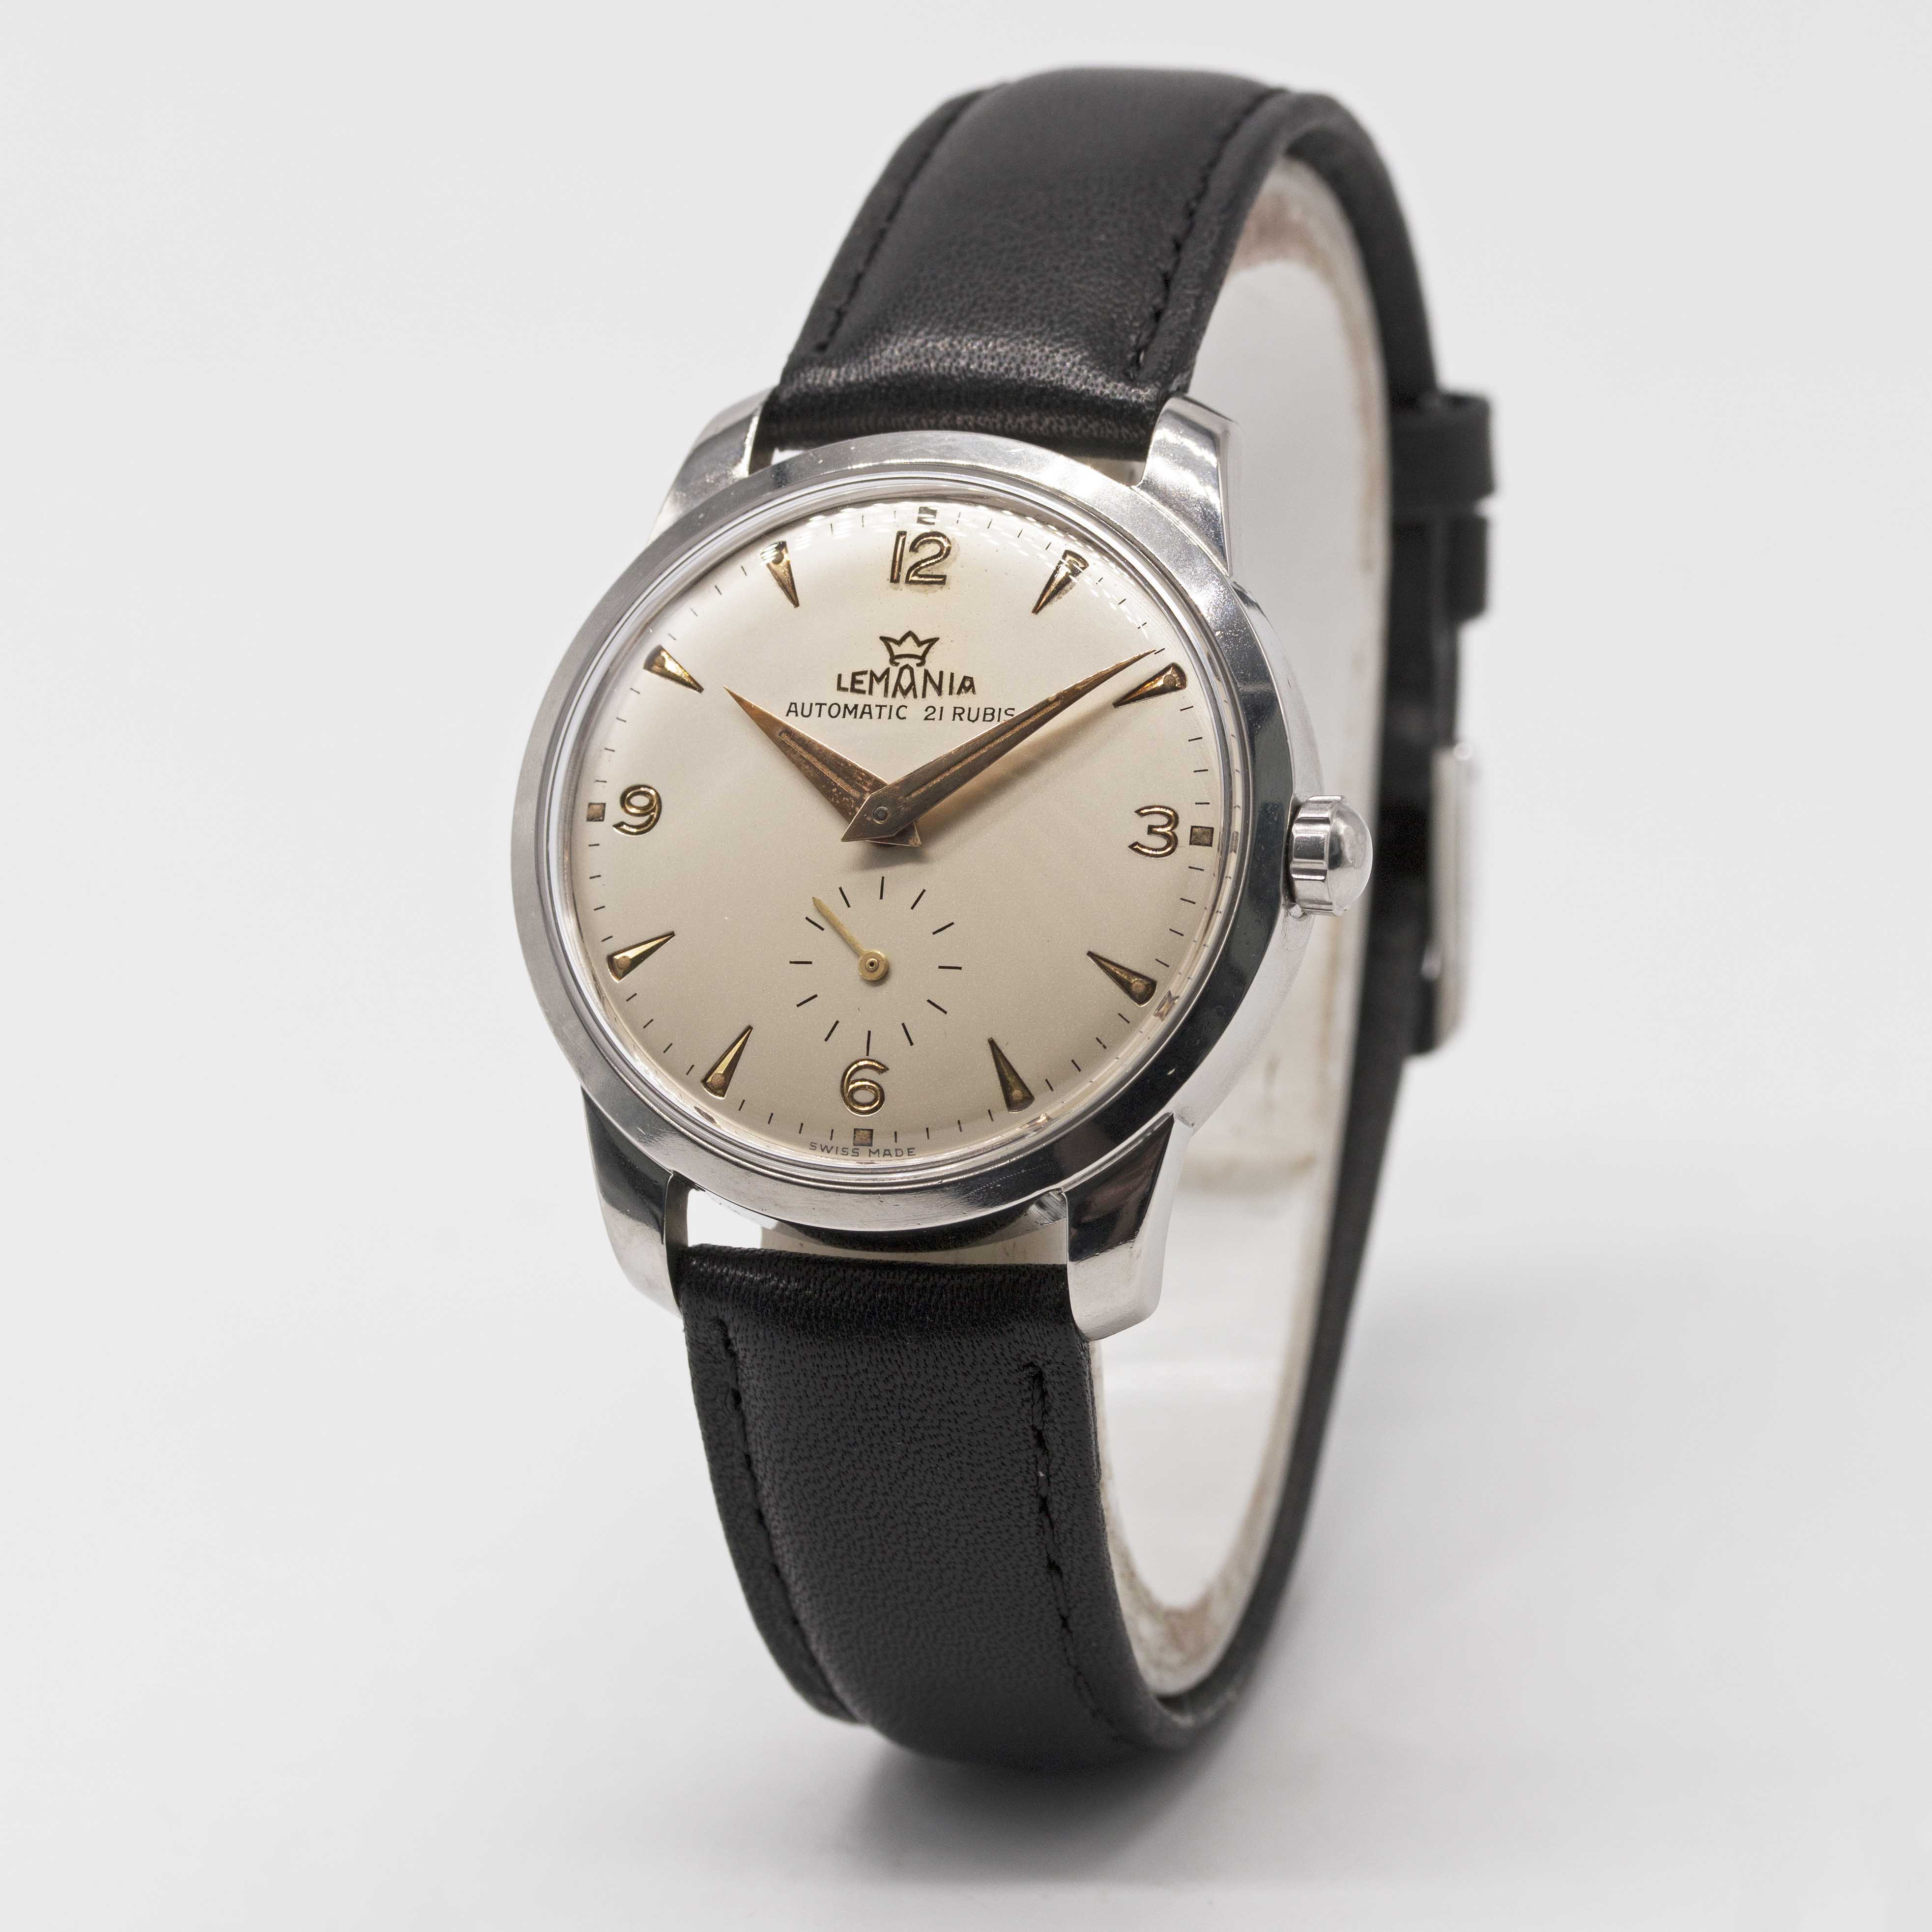 A GENTLEMAN'S STAINLESS STEEL LEMANIA AUTOMATIC WRIST WATCH CIRCA 1960s, REF. 288/3 SILVER DIAL WITH - Image 3 of 6